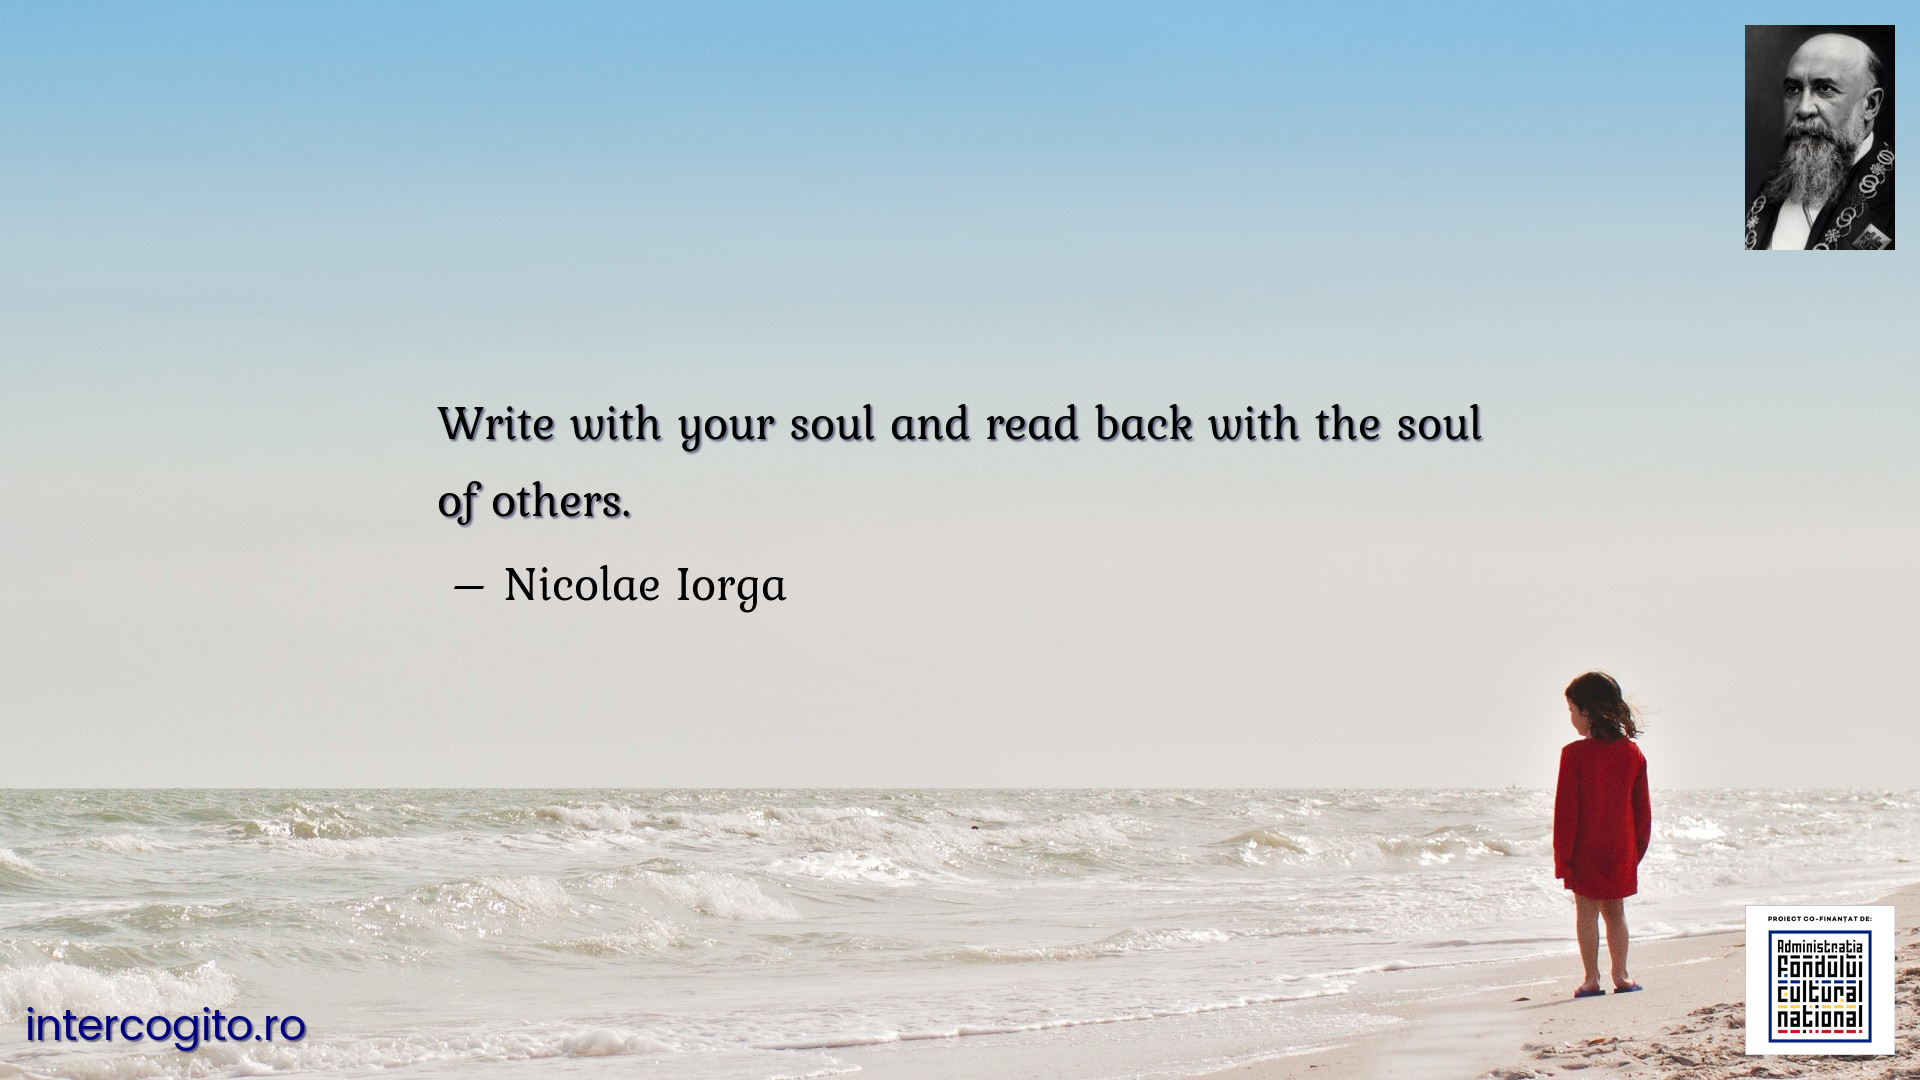 Write with your soul and read back with the soul of others.